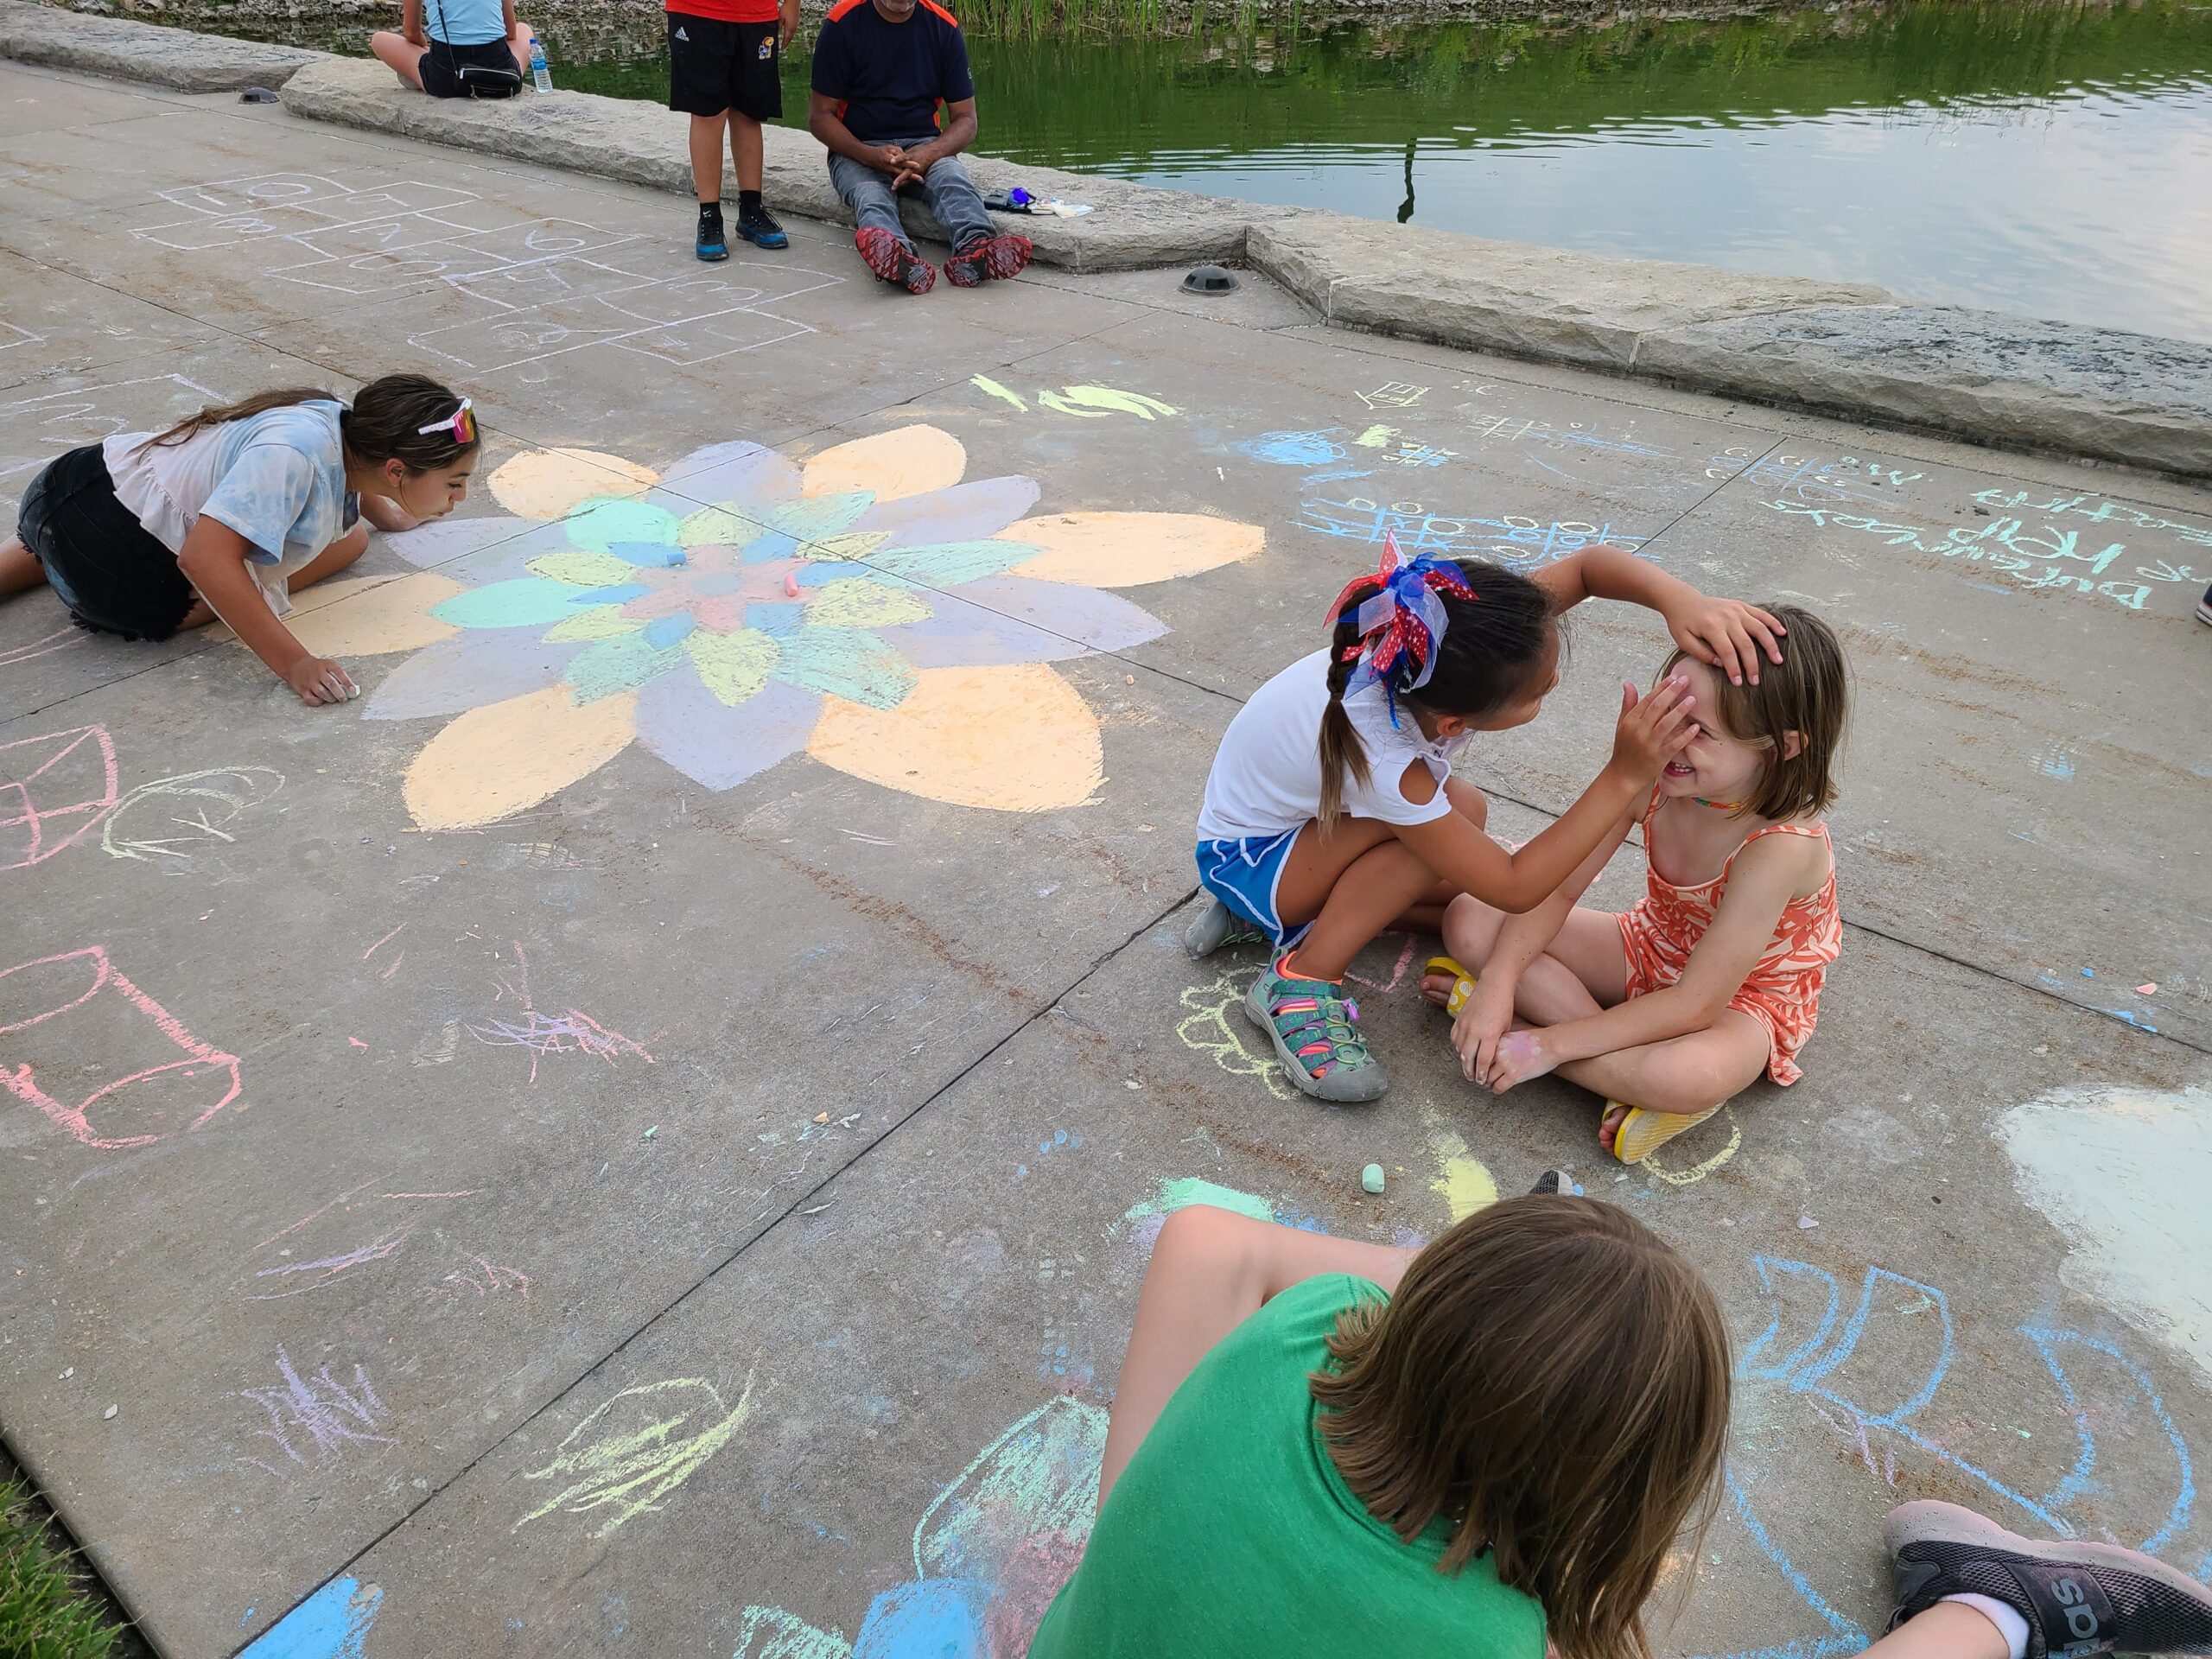 Children decorating the sidewalk outside the Dole Institute with chalk drawings